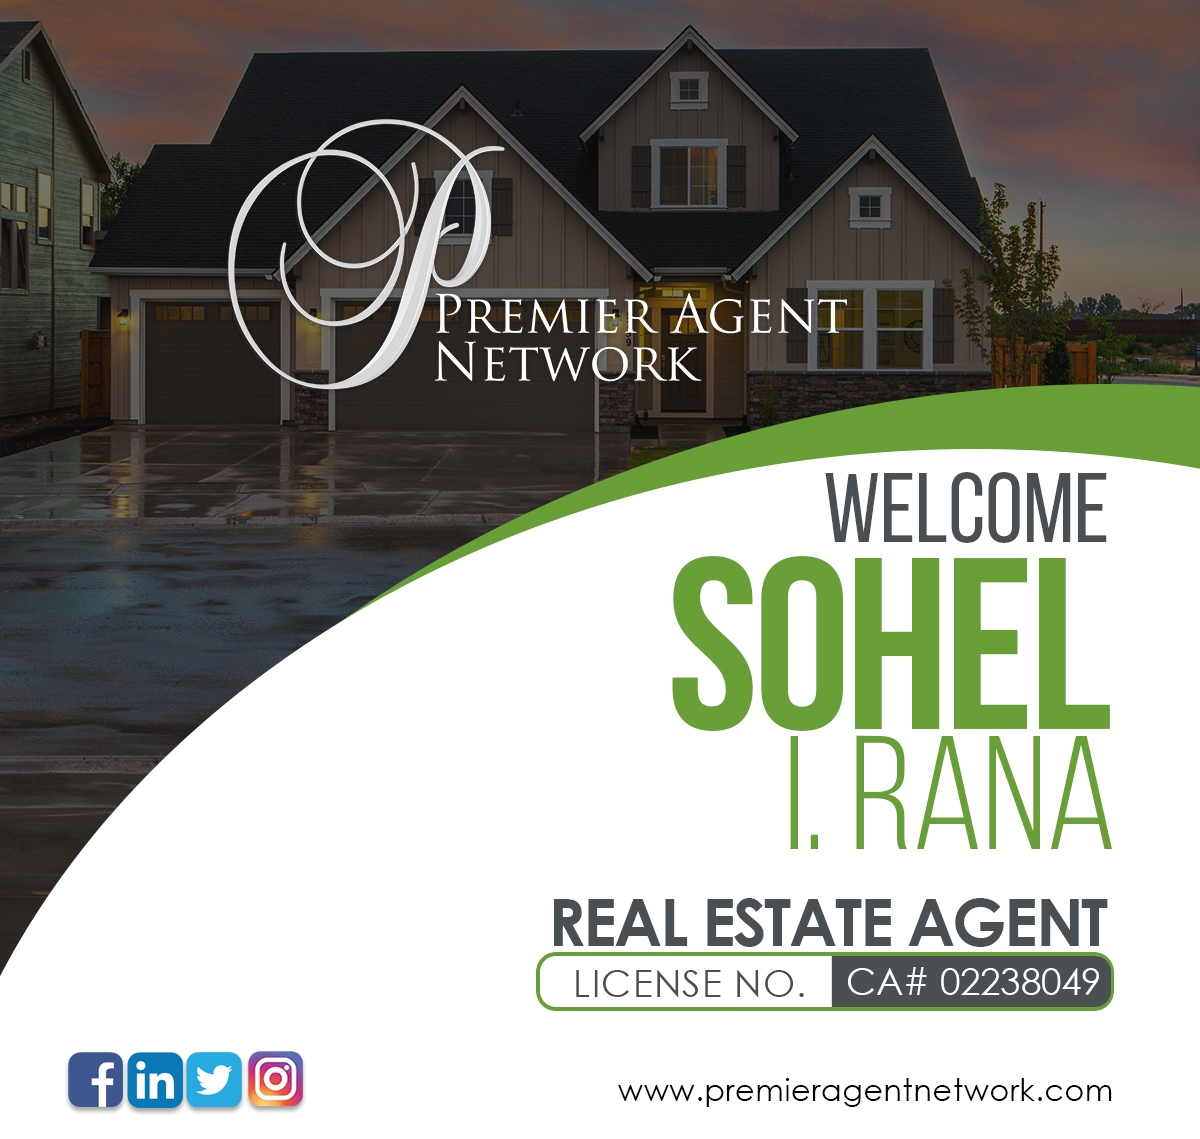 Welcoming Sohel Rana to the Premier Agent Network family!

Sohel will be servicing Orange County, Los Angeles County, Riverside County, San Bernardino County, Ventura, San Diego, California areas and can be reached at (714) 561-5648.

#newagent #welcome #premieragentnetwork